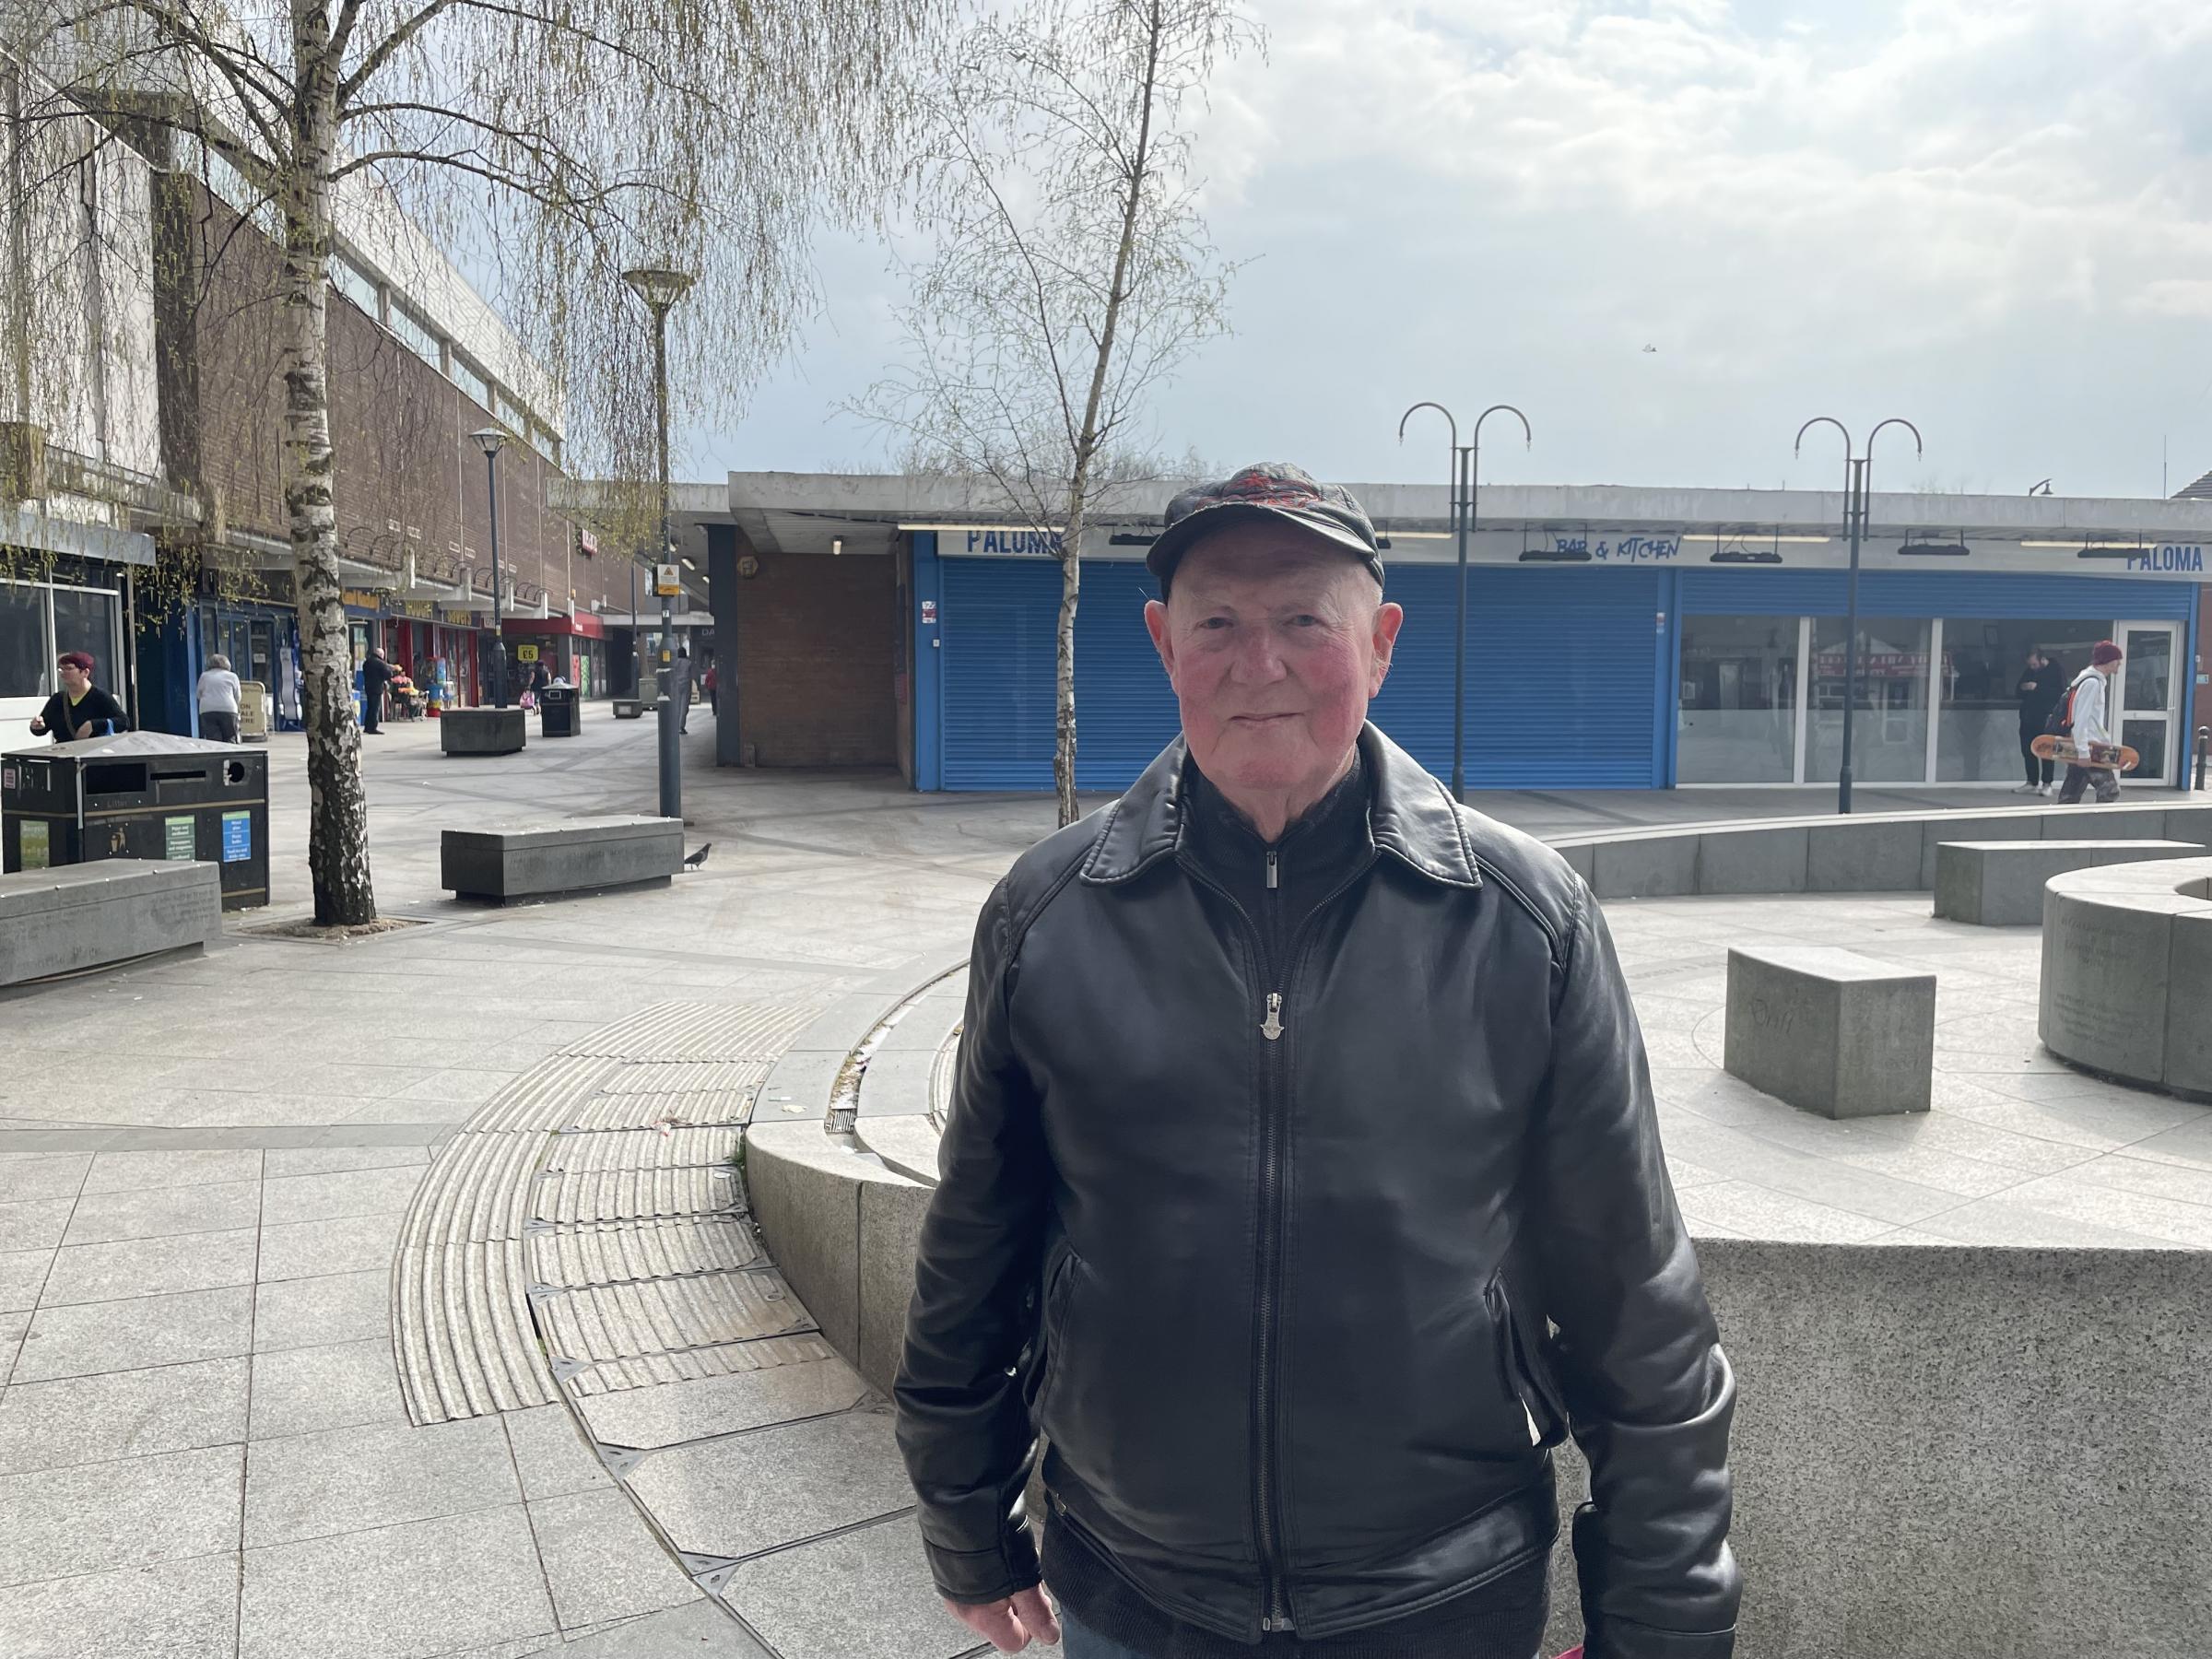 John OBrien, from Whitefield believes the area would benefit from more hustle and bustle with the centre offering more restaurants and bars.